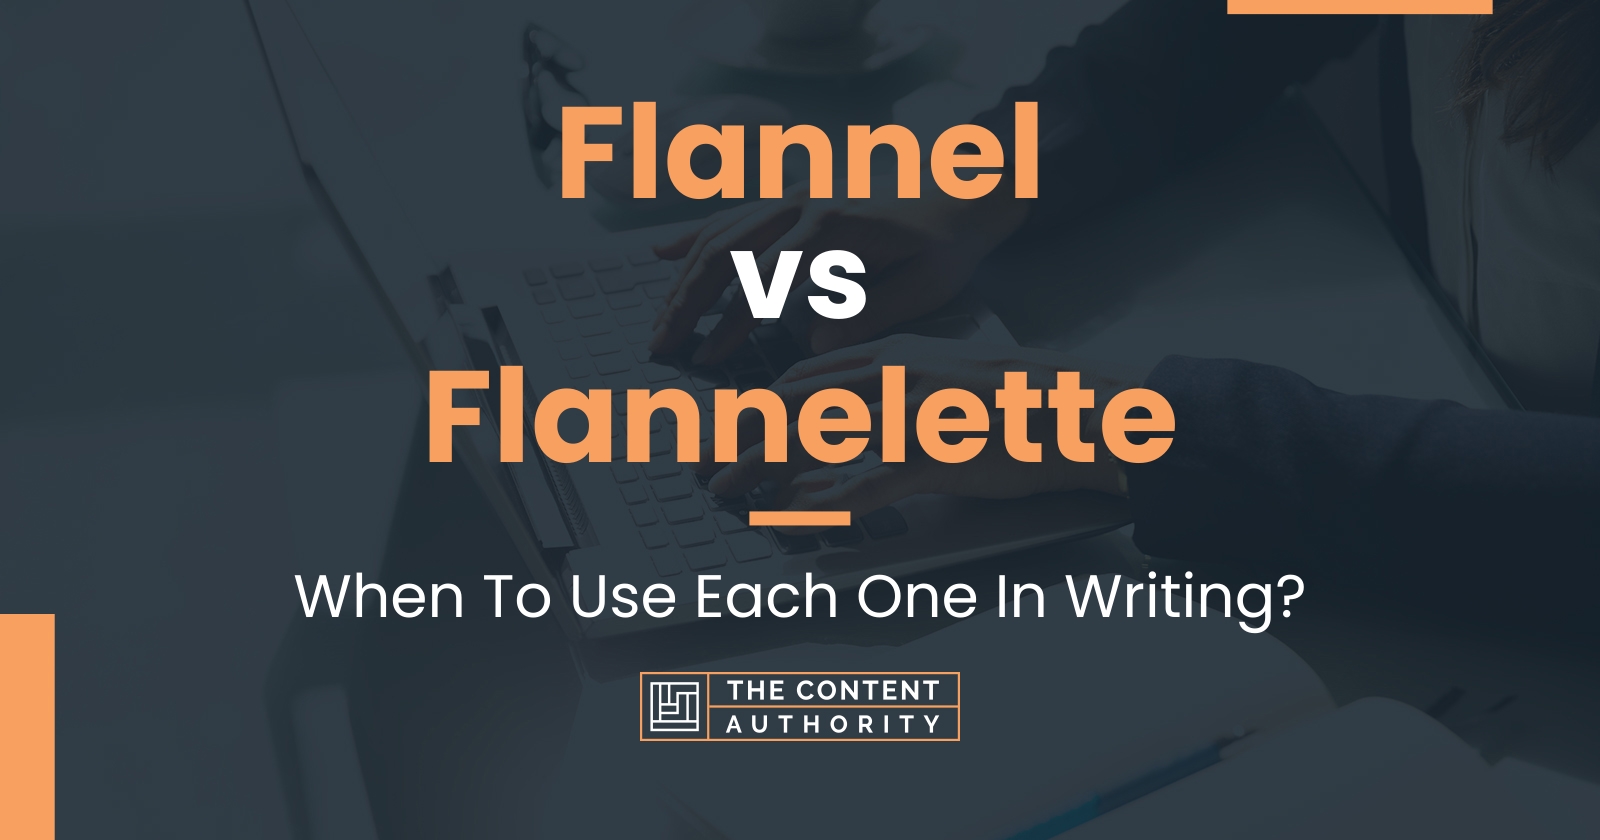 Flannel vs Flannelette: When To Use Each One In Writing?